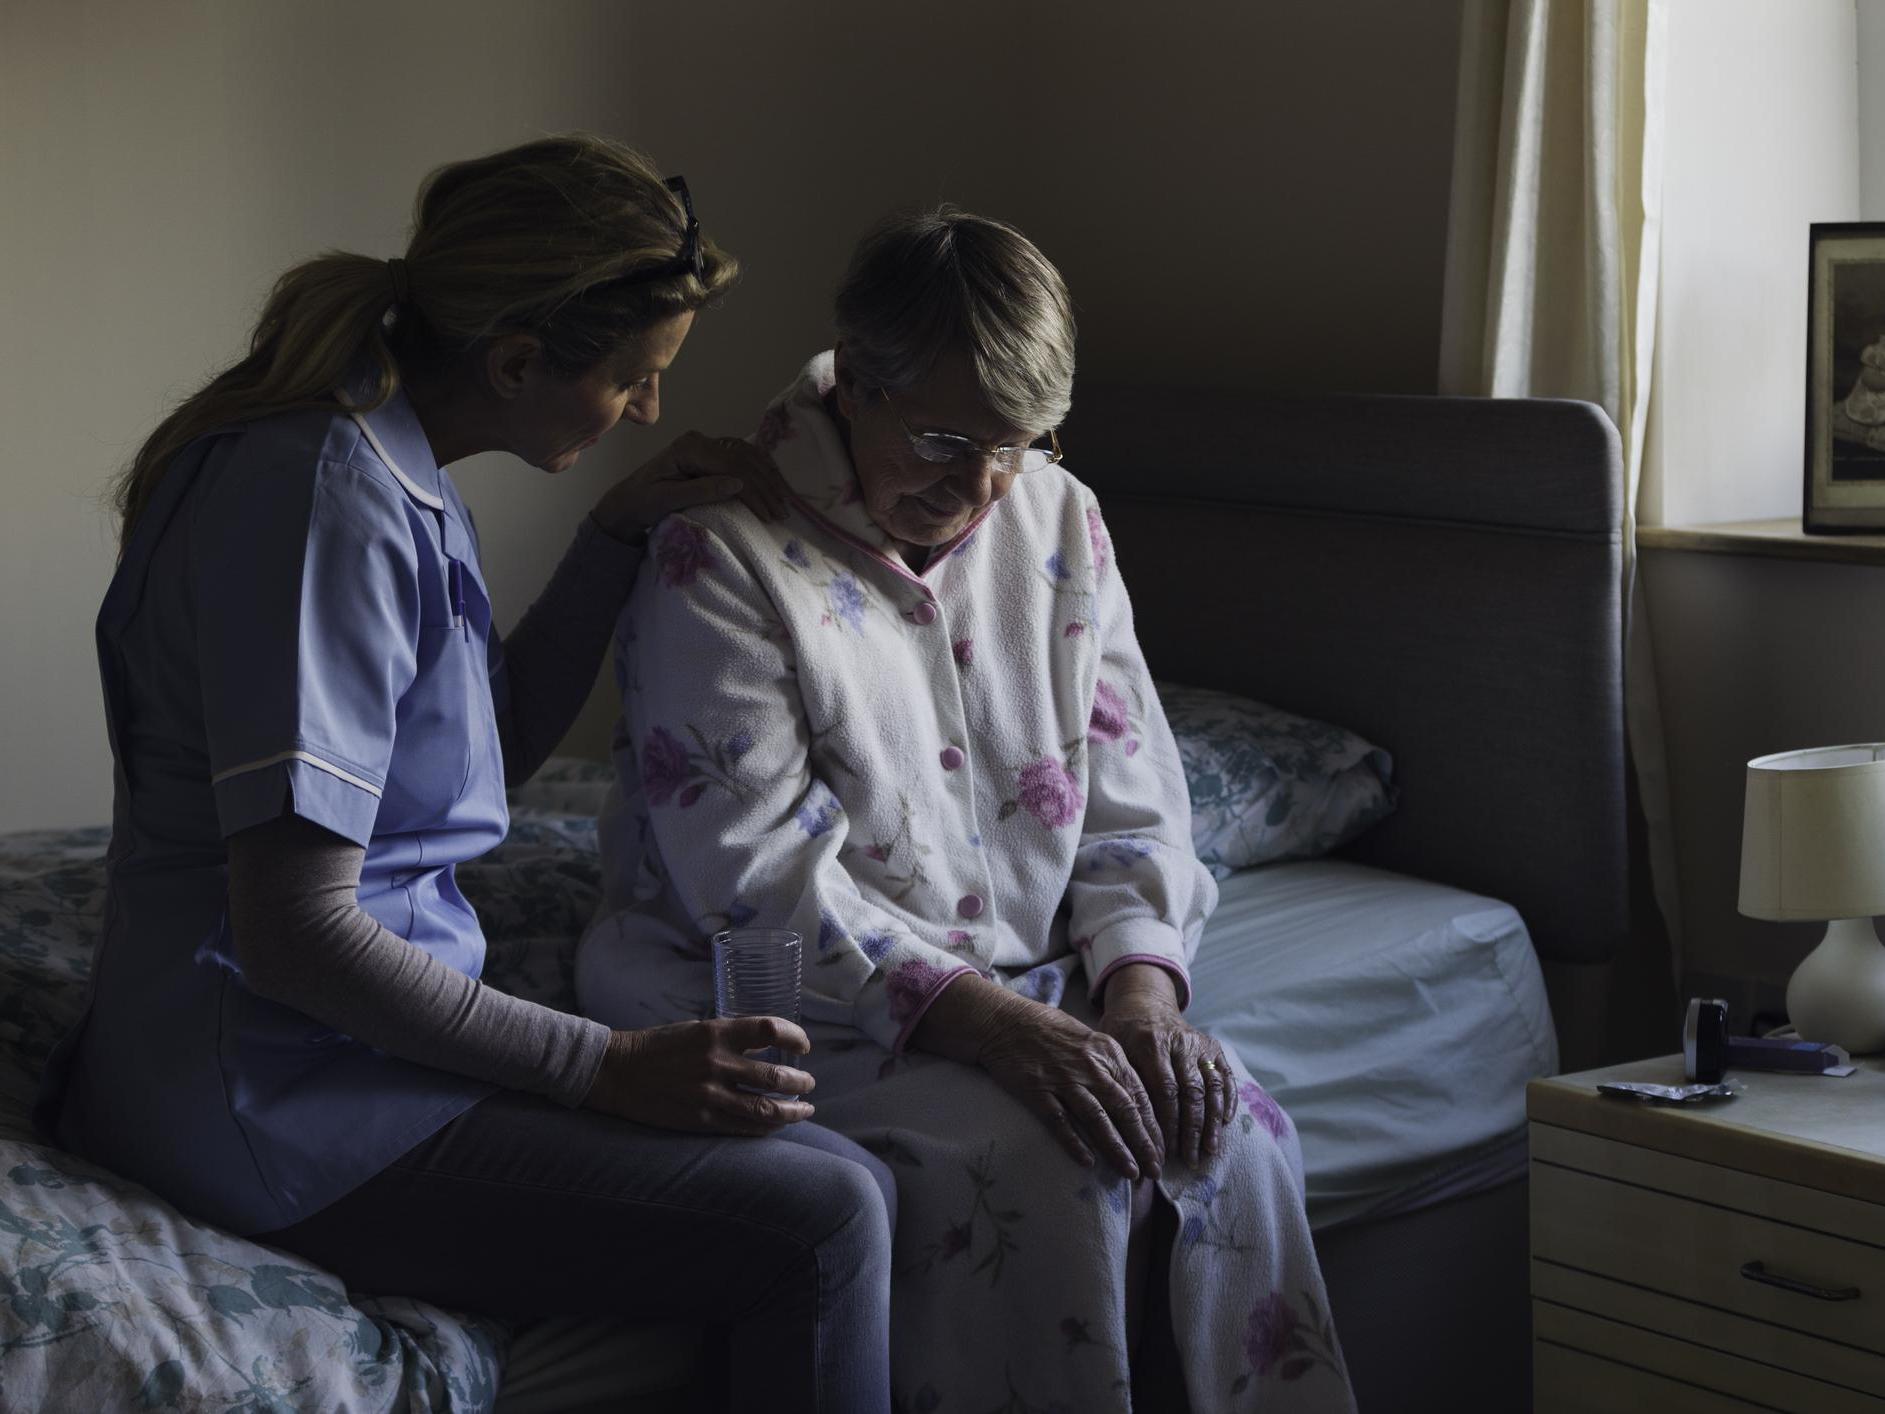 Women working in the social care sector, who care for some of the most vulnerable and frail people in the country, raised concerns they are not being given basic protective equipment which allows them to safely interact with others